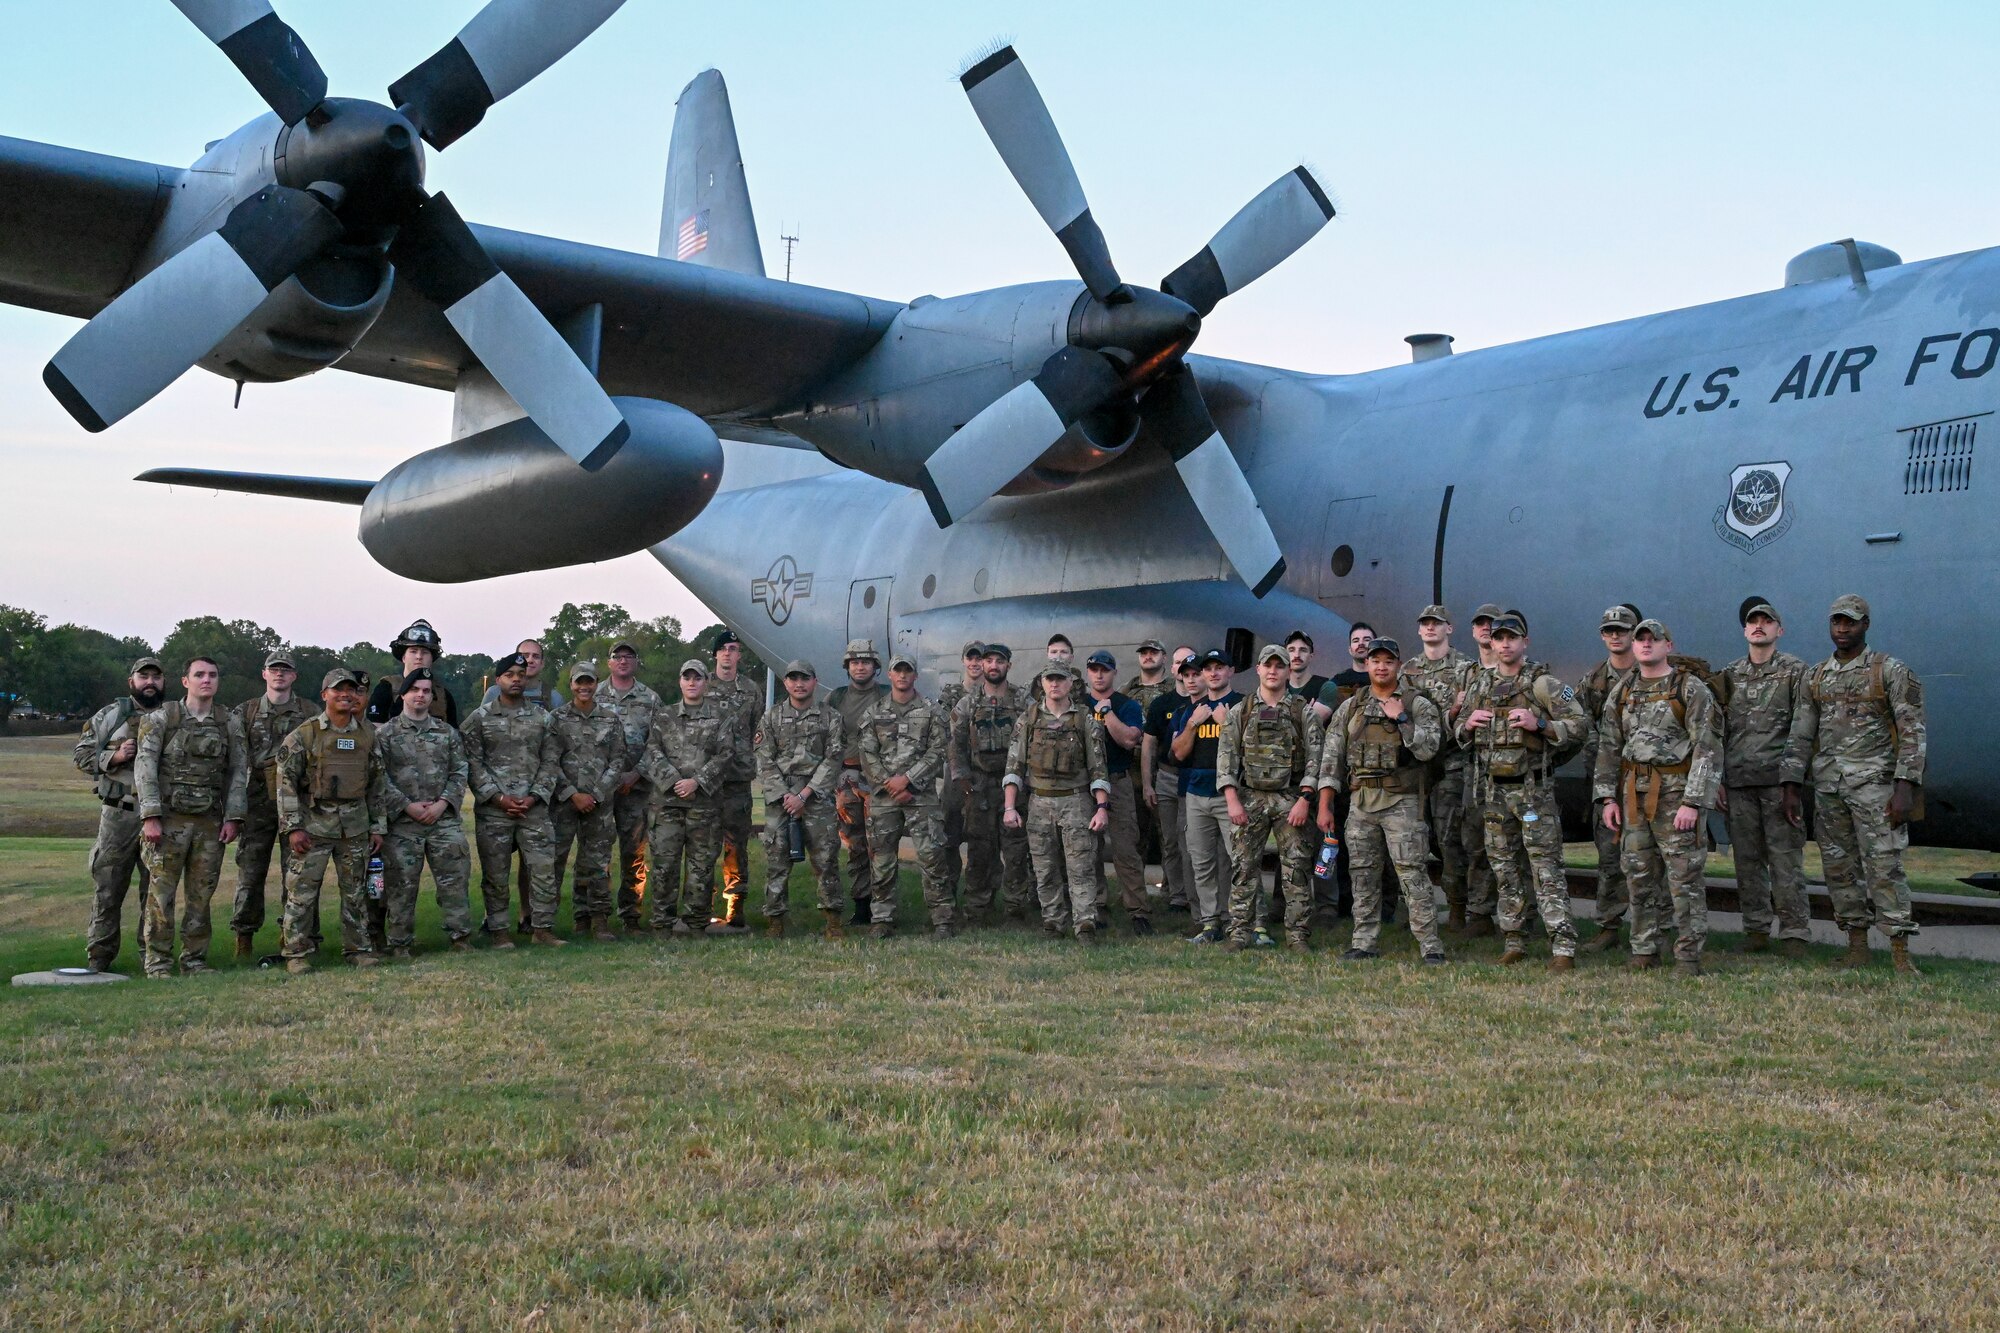 Airmen pose for a photo in front of an aircraft static.